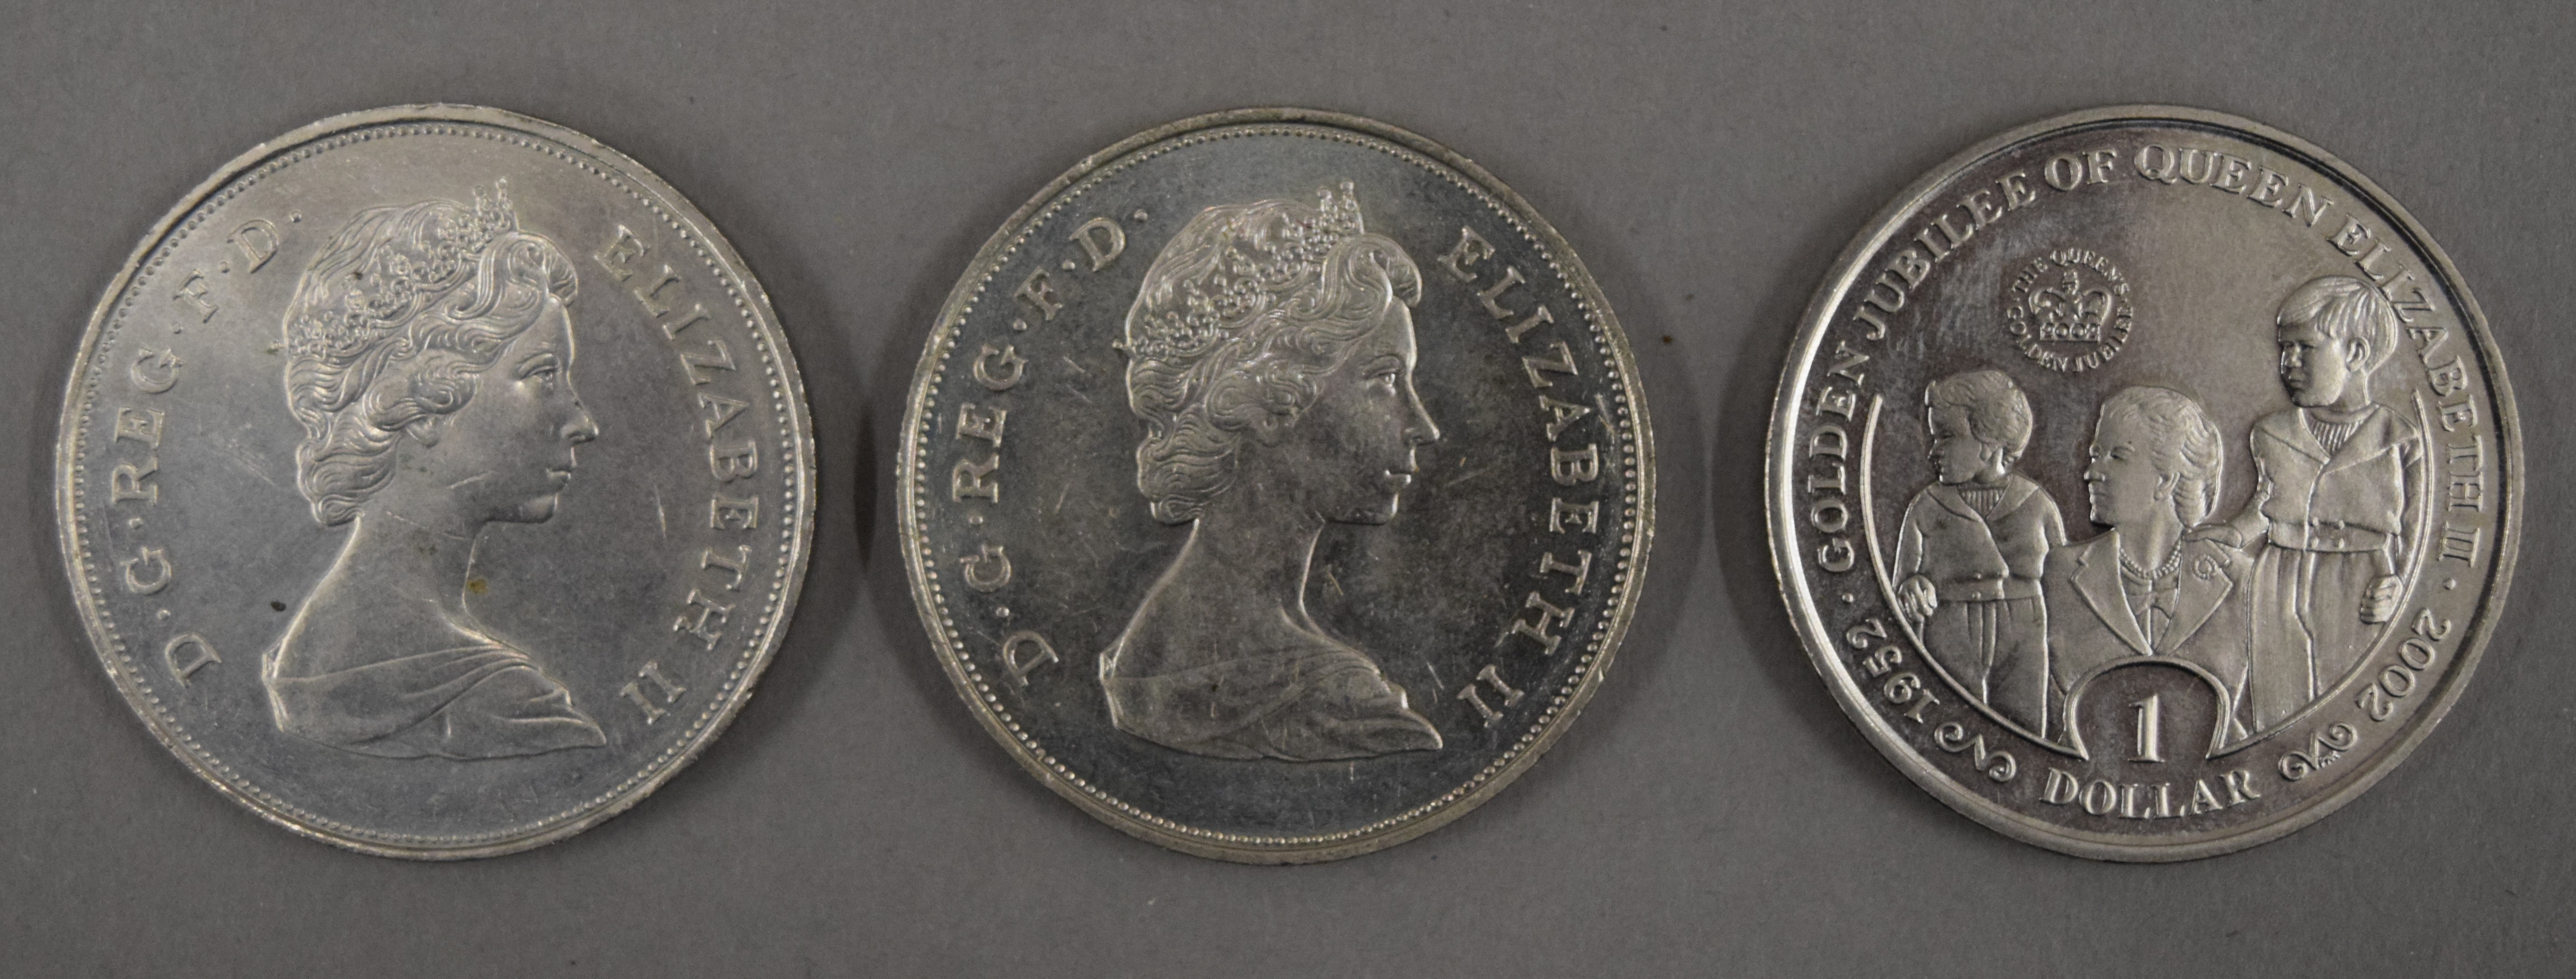 A collection of various coins, including 2000 time capsule, Britain at War, etc. - Image 7 of 18